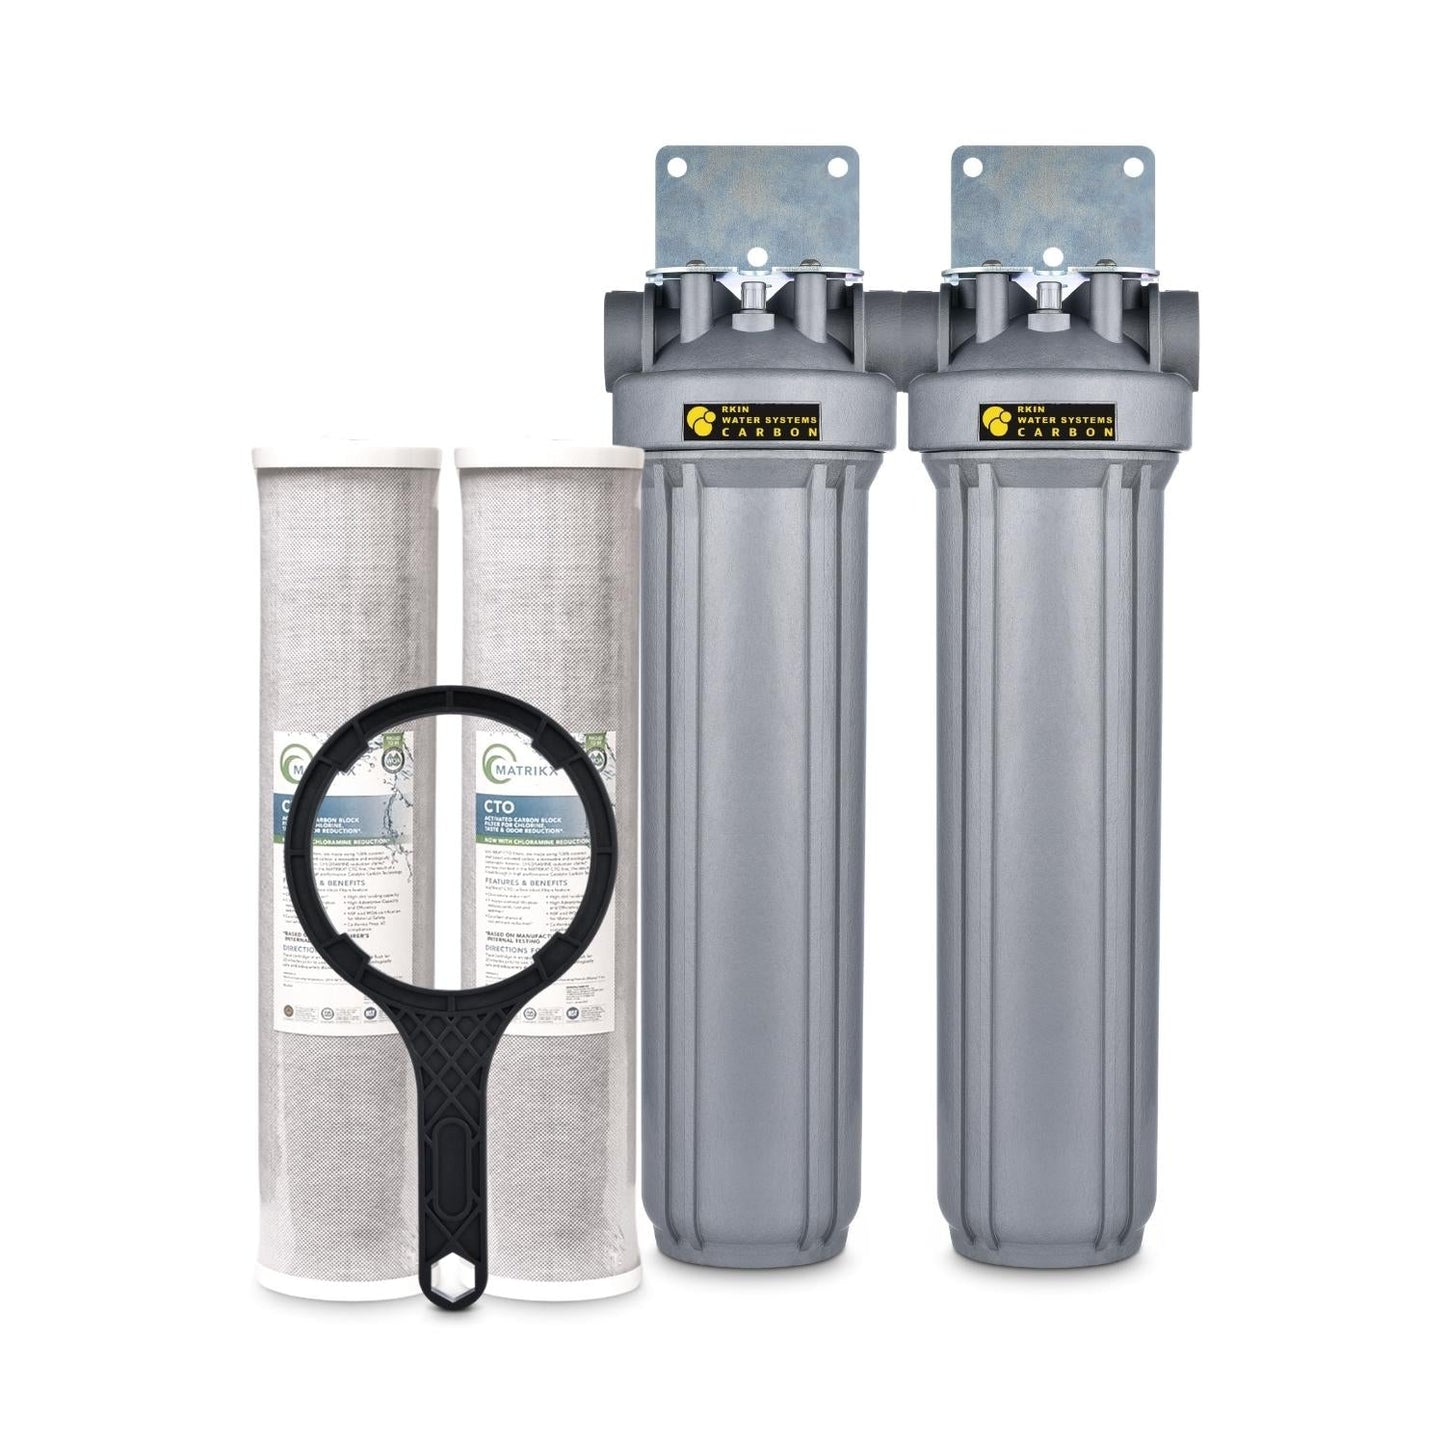 CBS Dual Carbon Whole House Water Filter - RKIN